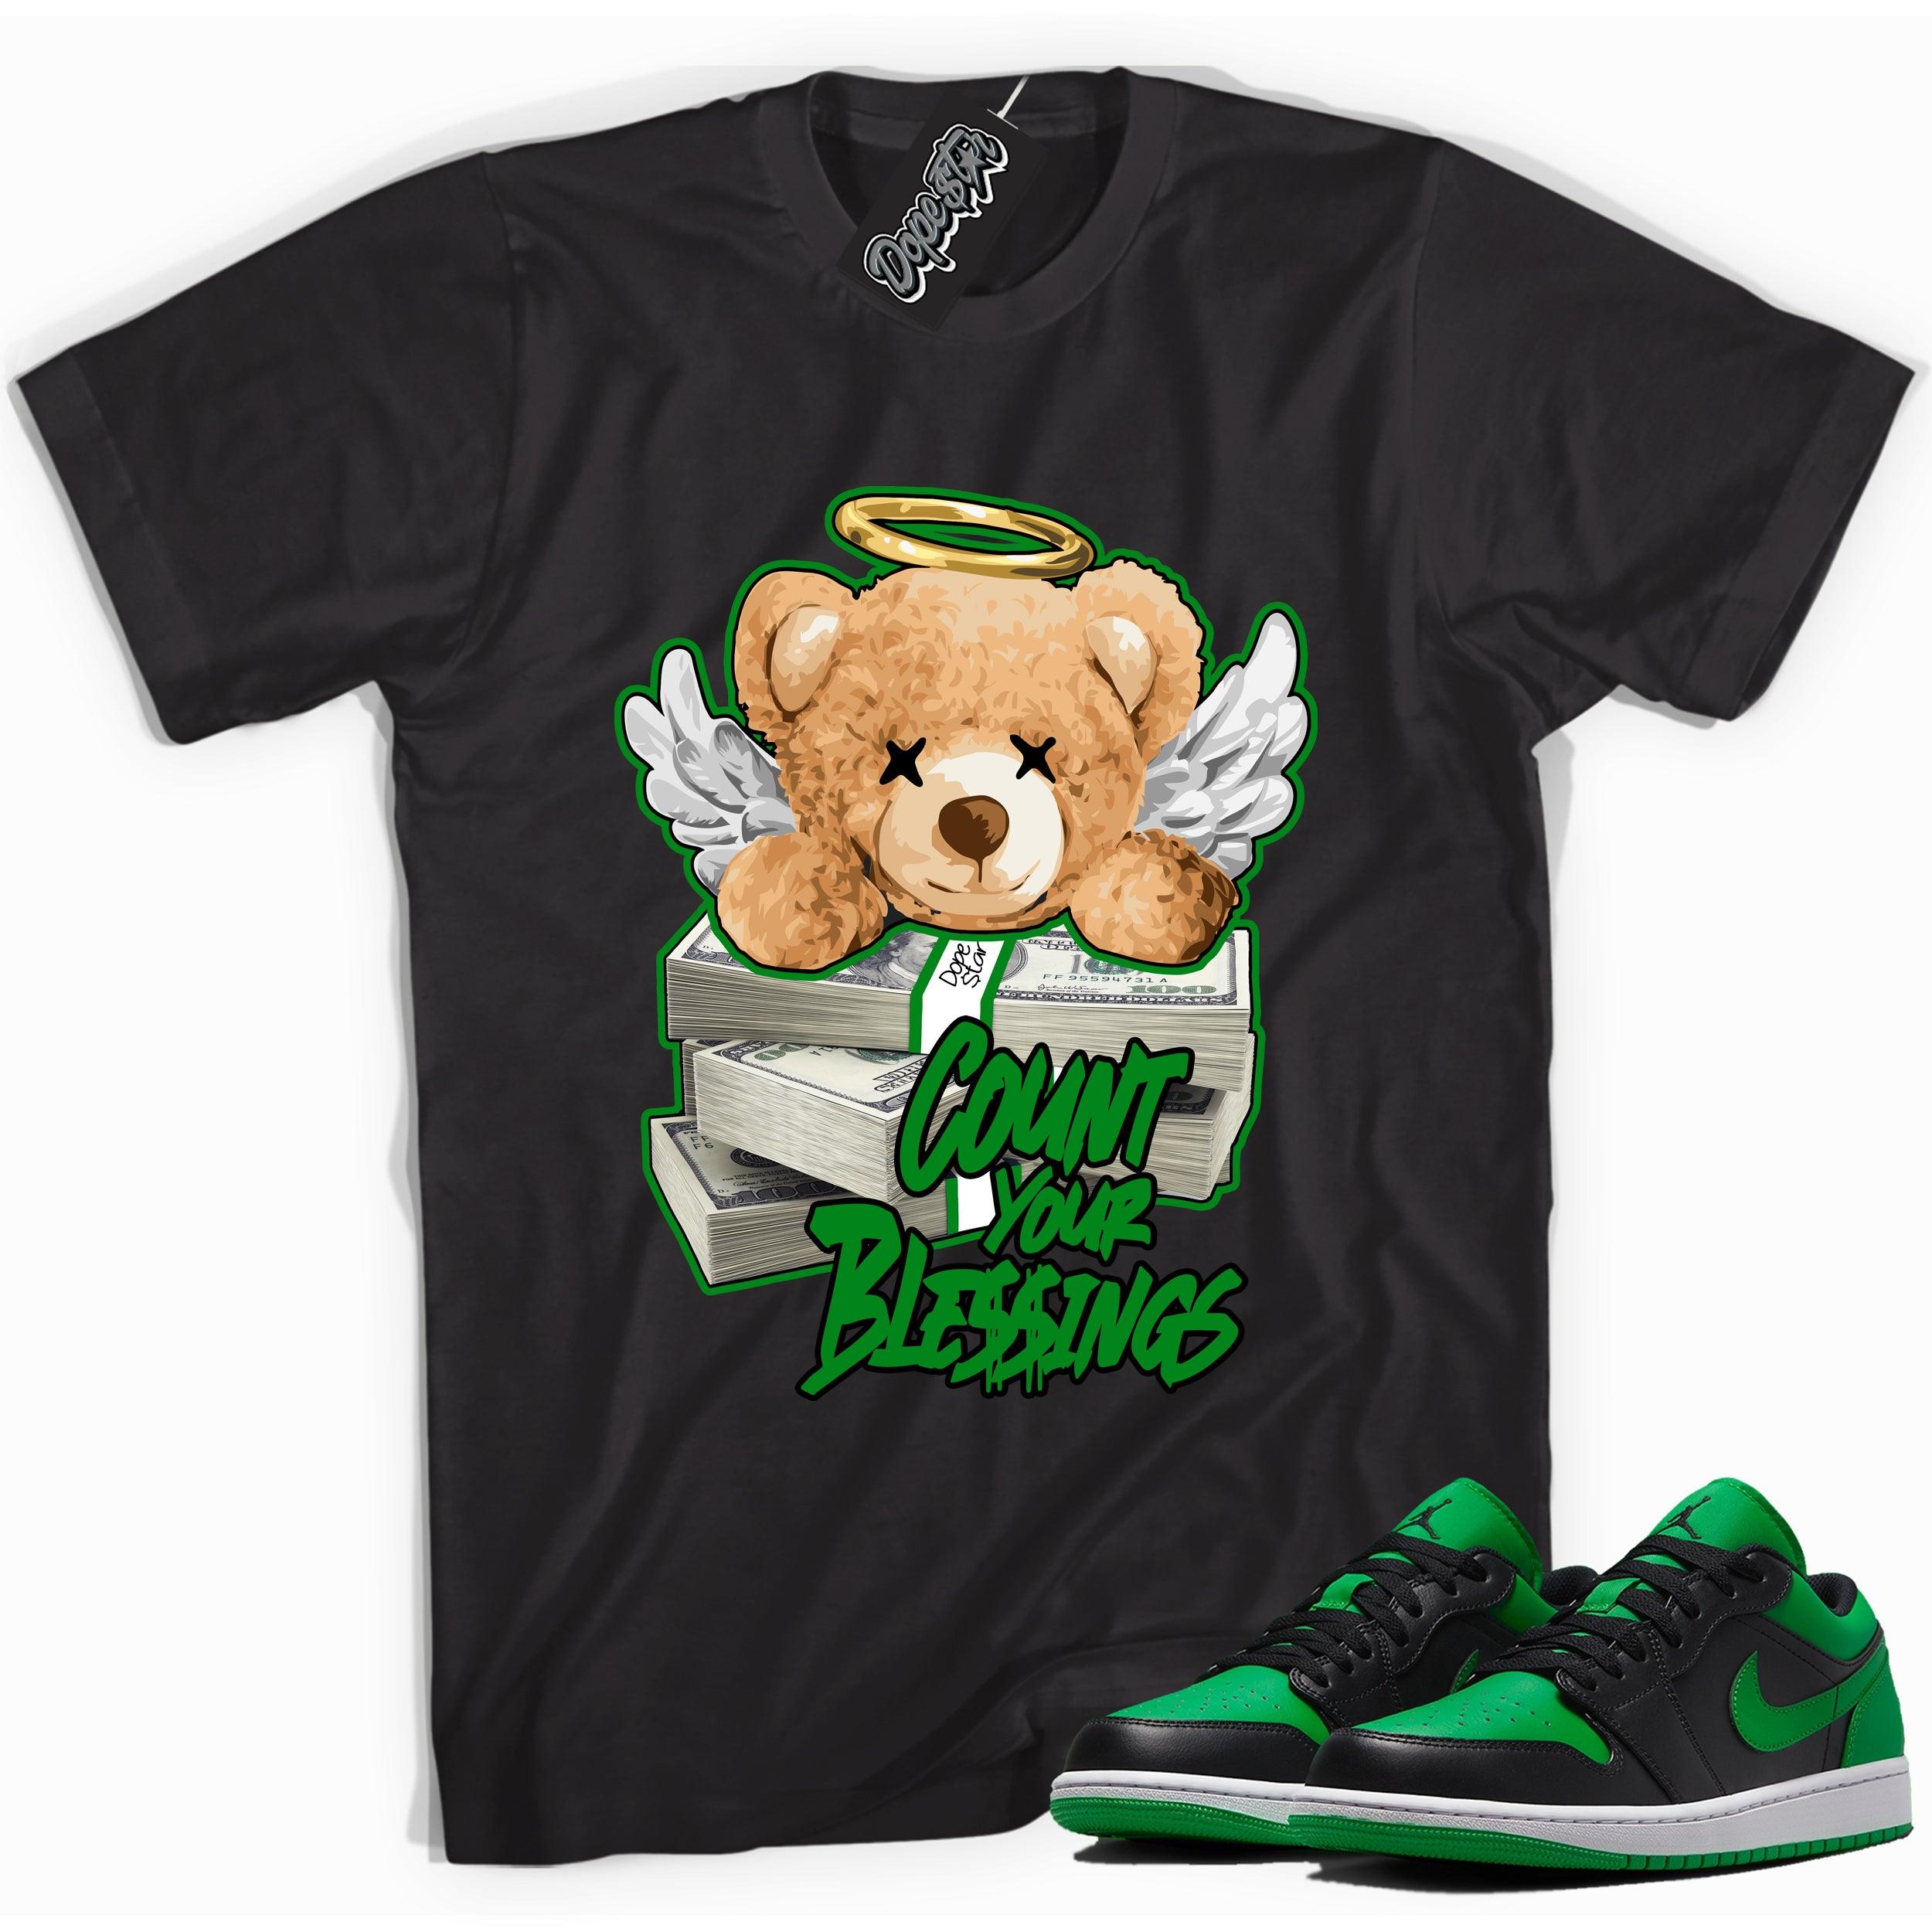 Cool black graphic tee with 'Count Your Blessings' print, that perfectly matches Air Jordan 1 Low Lucky Green sneakers